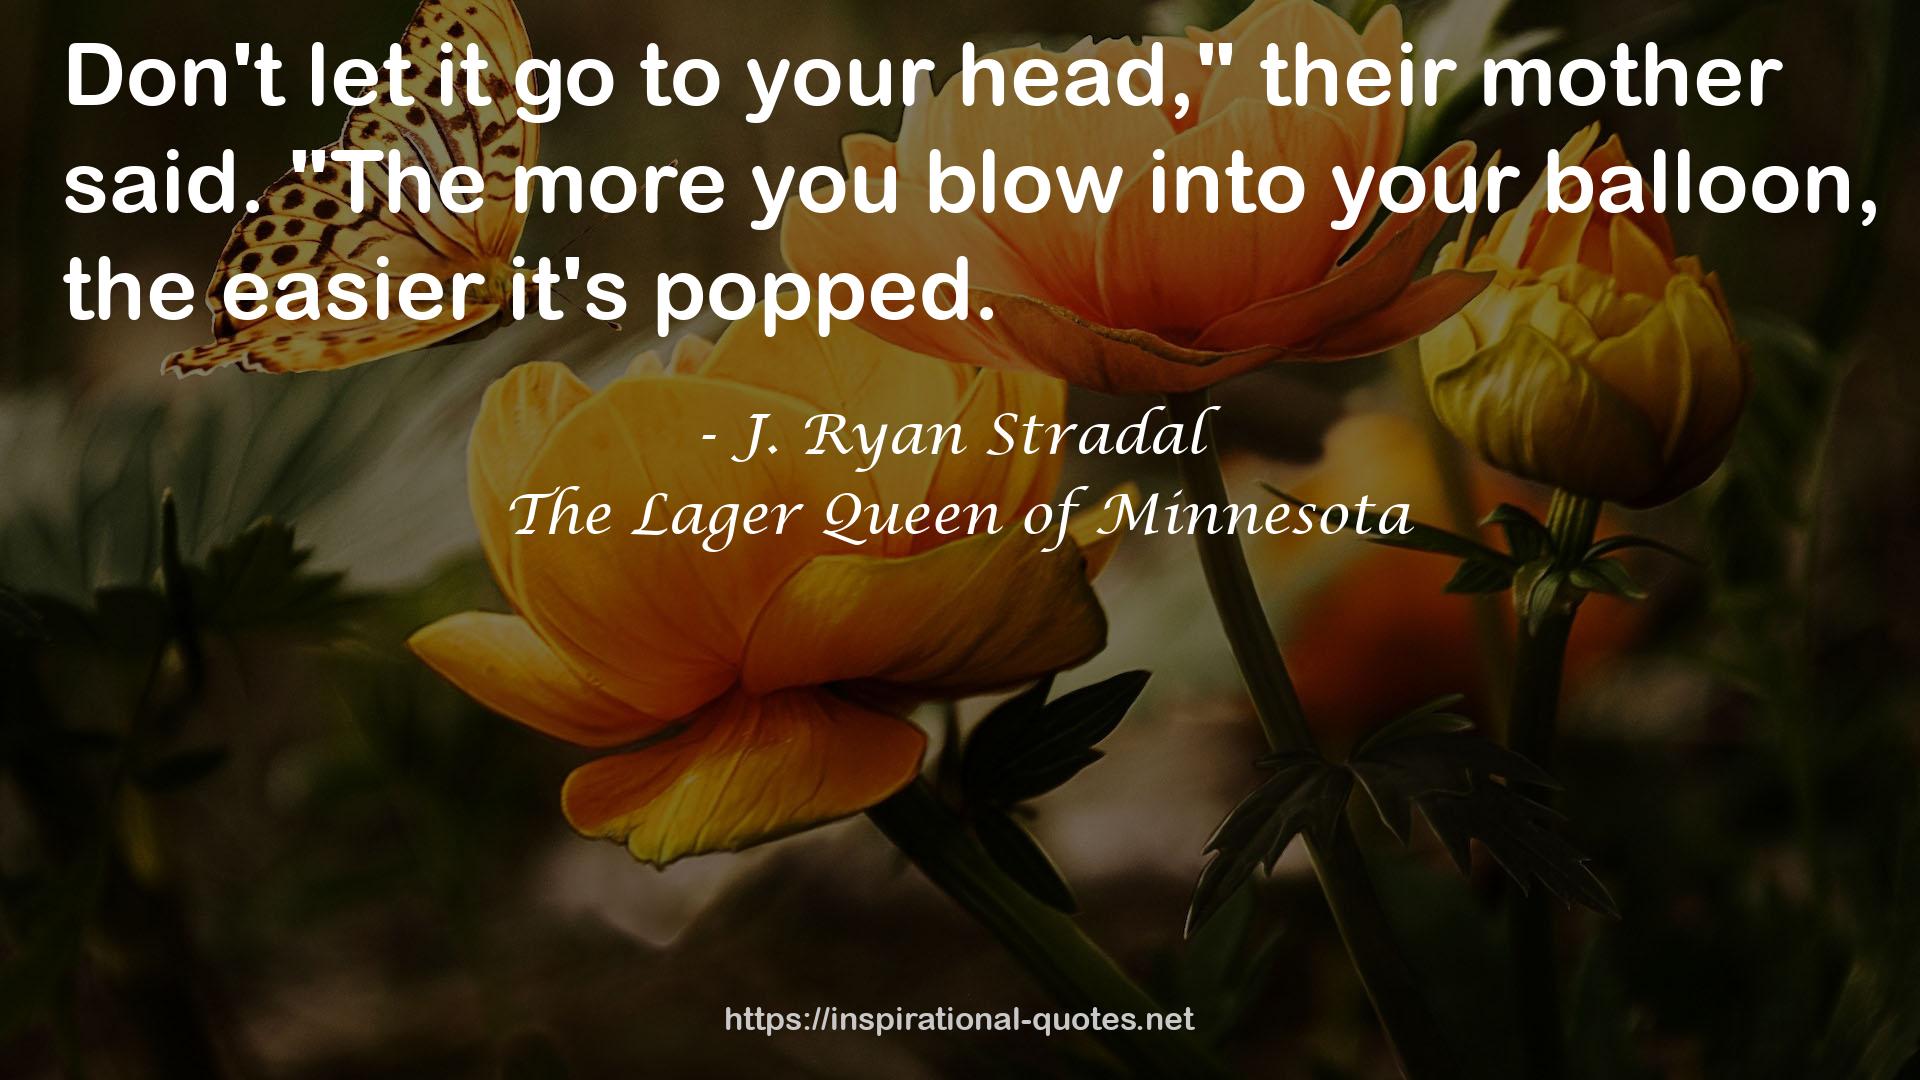 The Lager Queen of Minnesota QUOTES